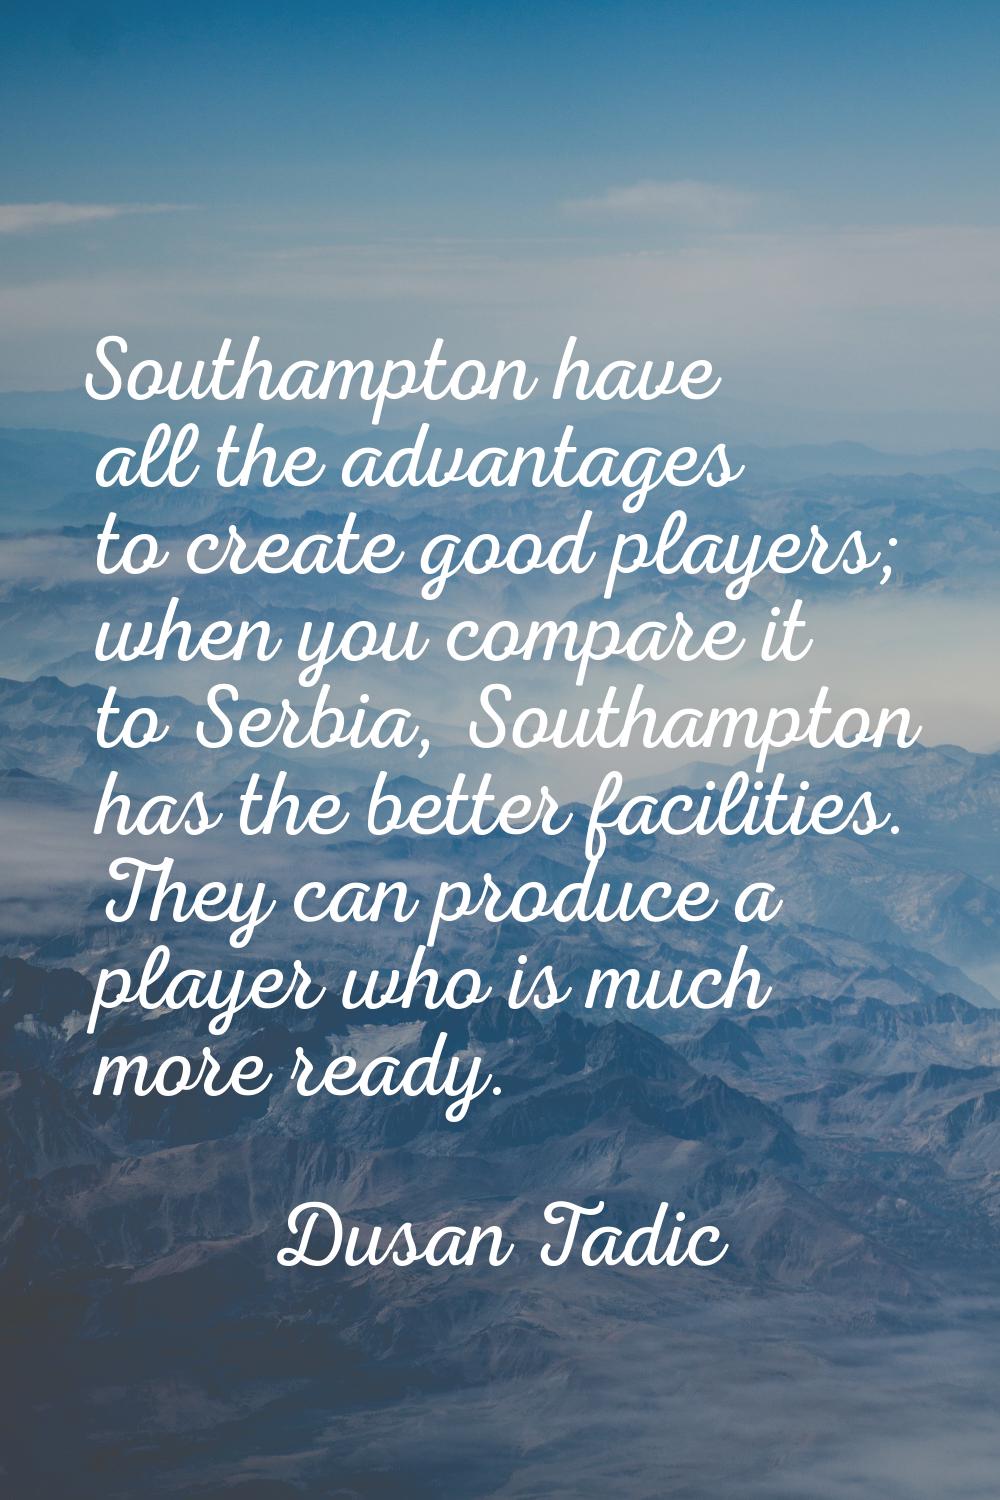 Southampton have all the advantages to create good players; when you compare it to Serbia, Southamp